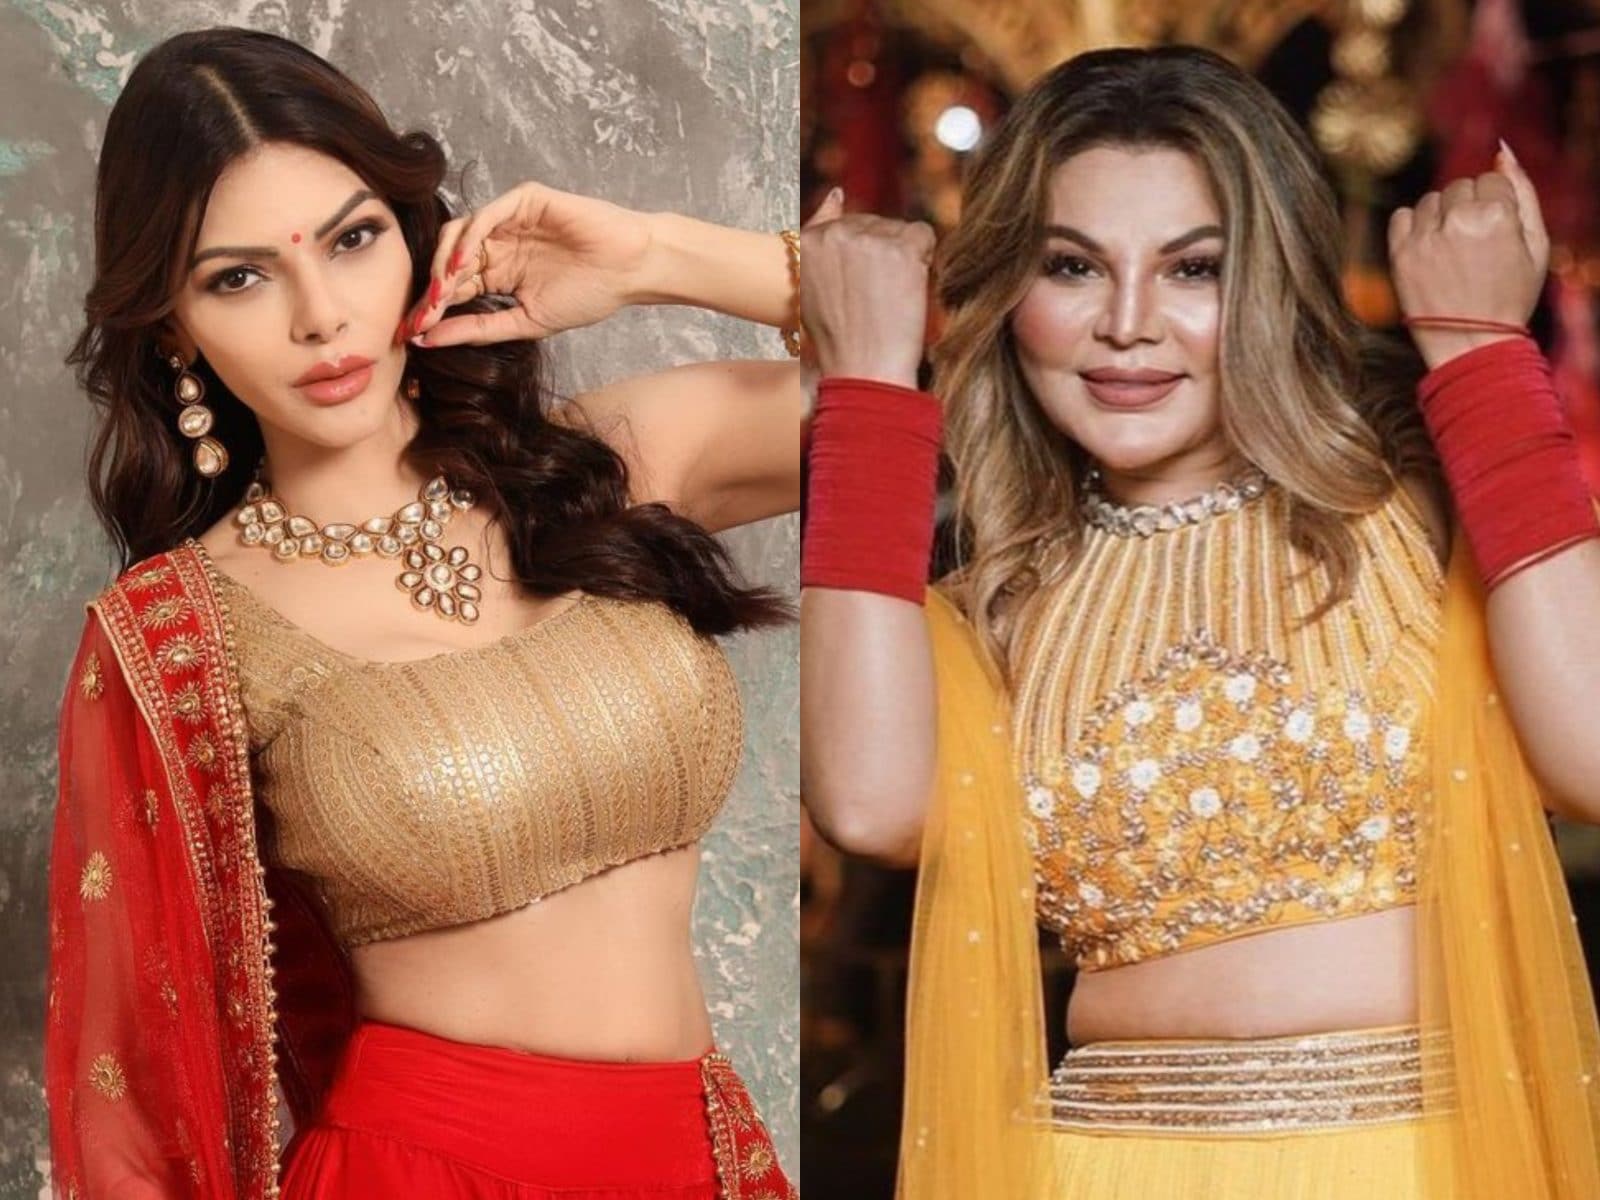 Mauni Roy Ka Bf Sexy - Sherlyn Chopra Asks Rakhi Sawant To Get Aside, Says 'My Fight Is Not With  Her' - News18